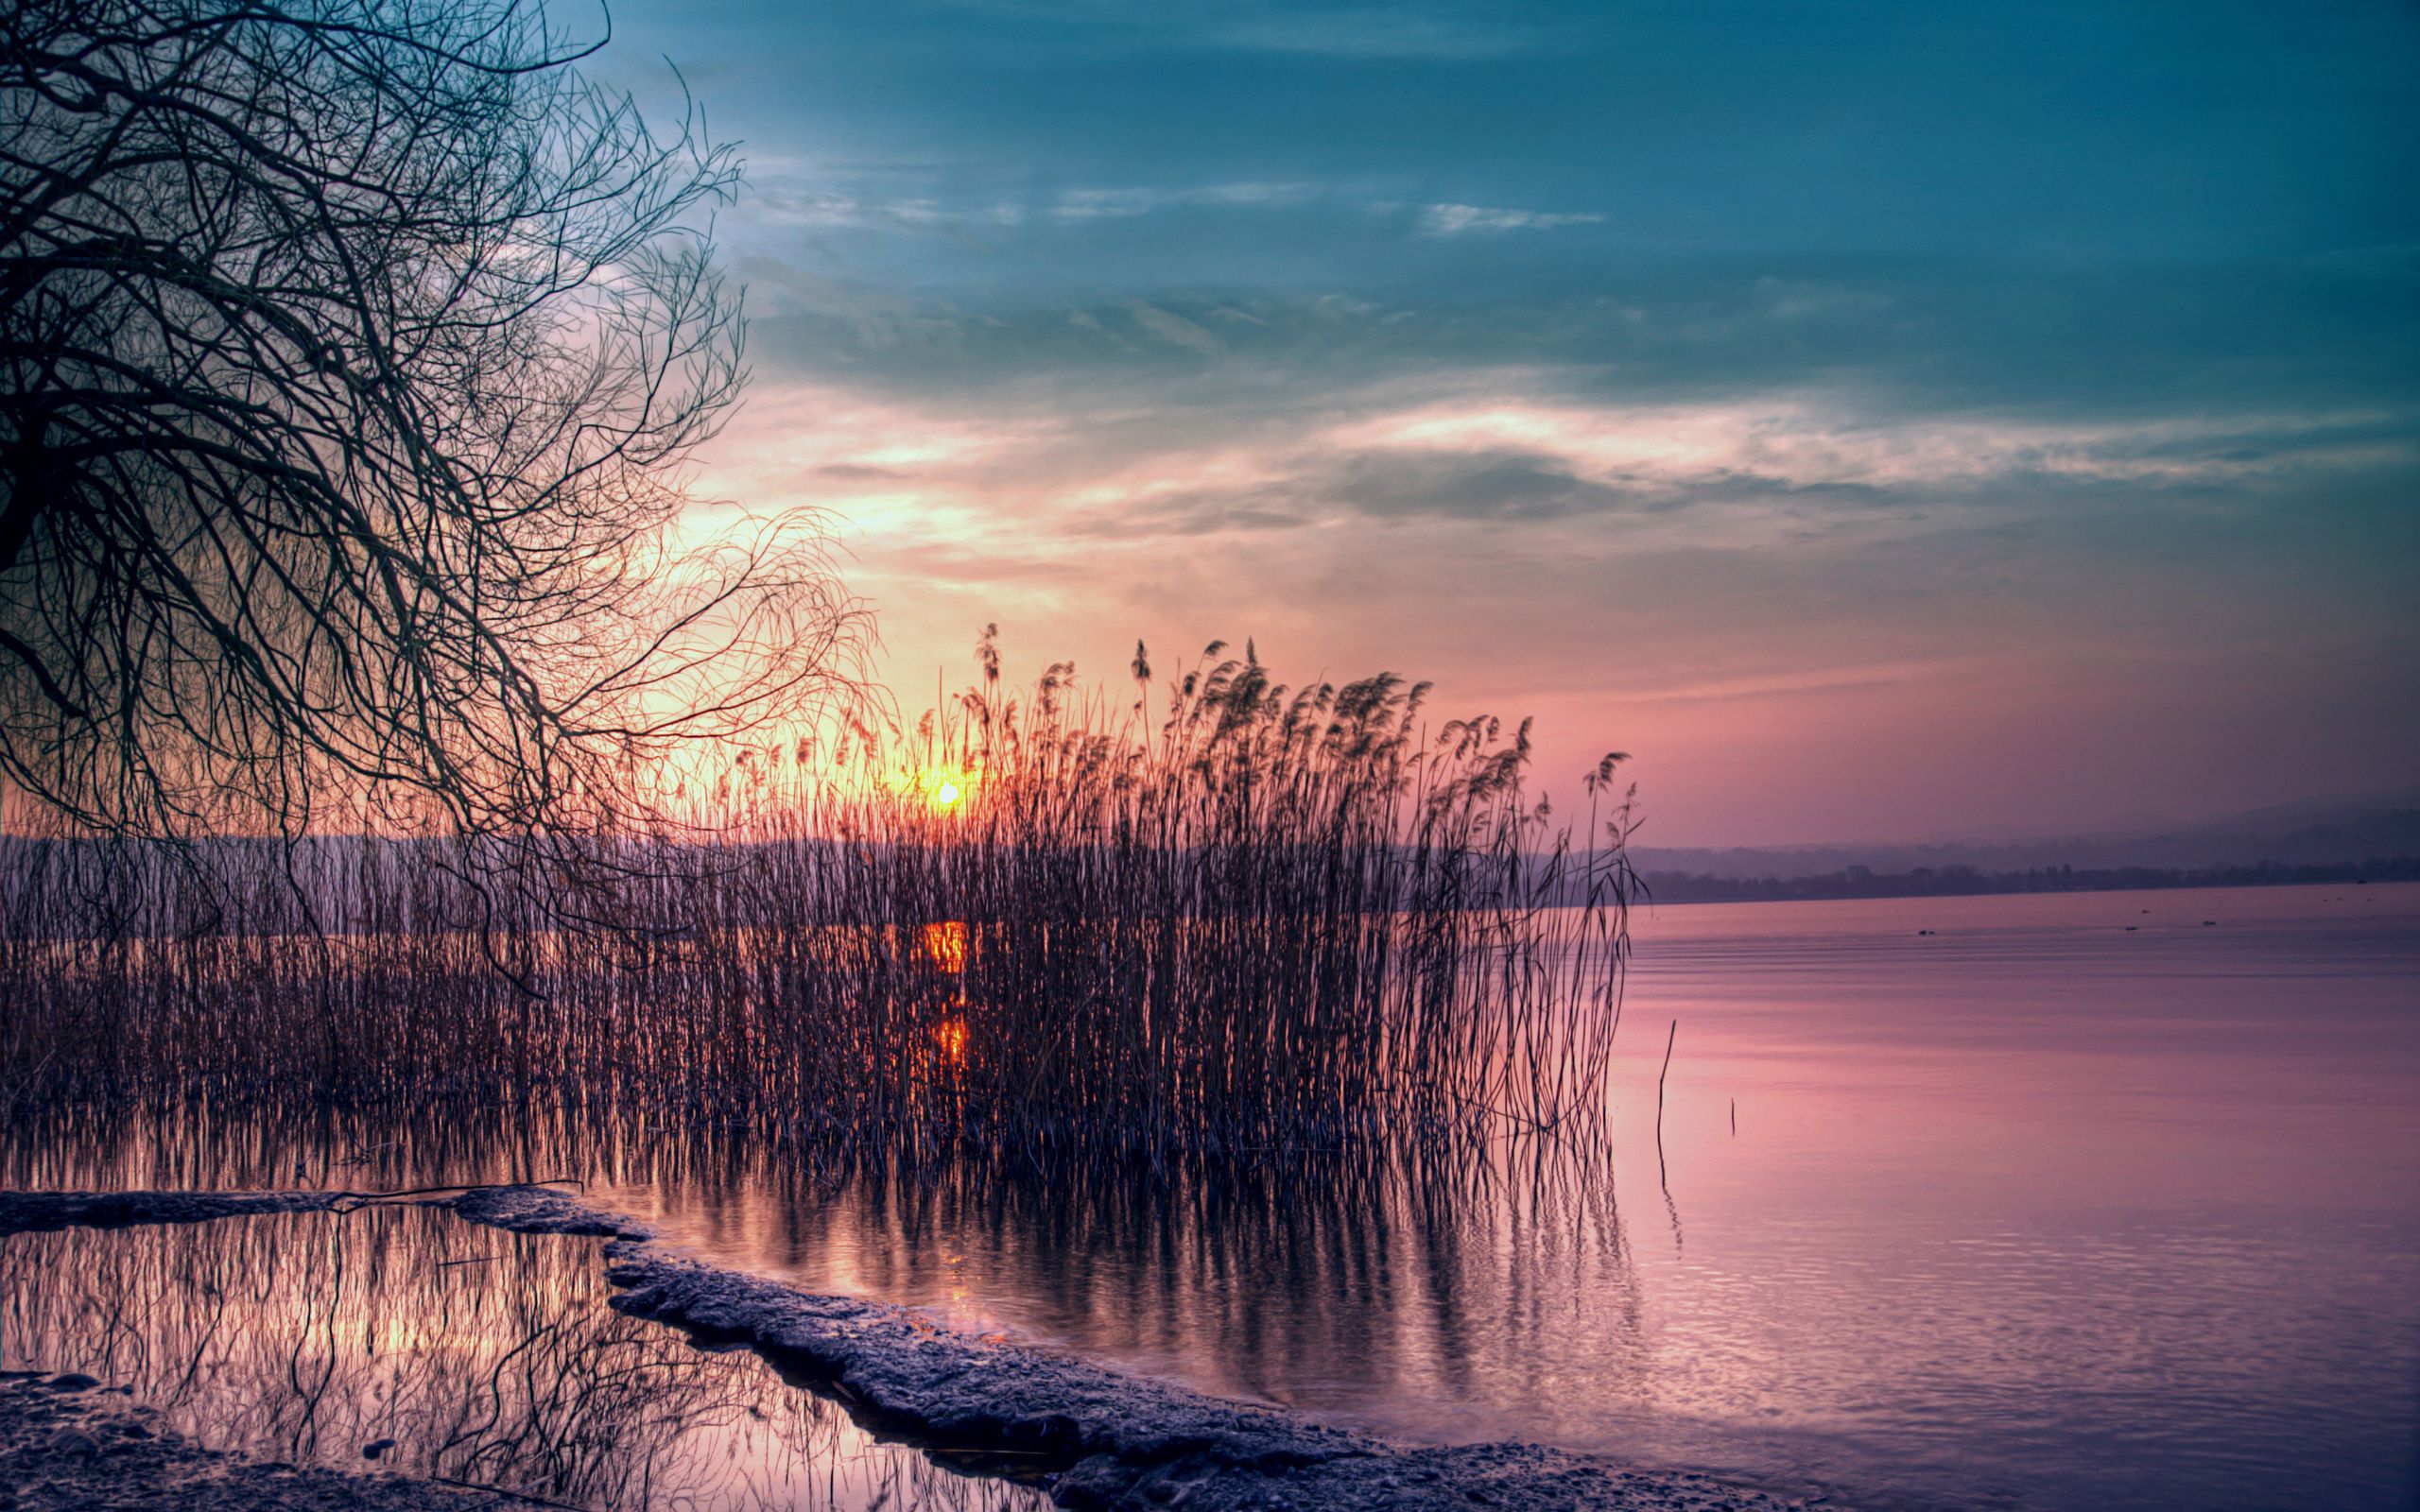 shore, bank, nature, water, sunset, wood, tree, branches, branch, evening, basin, cane, reed, willow